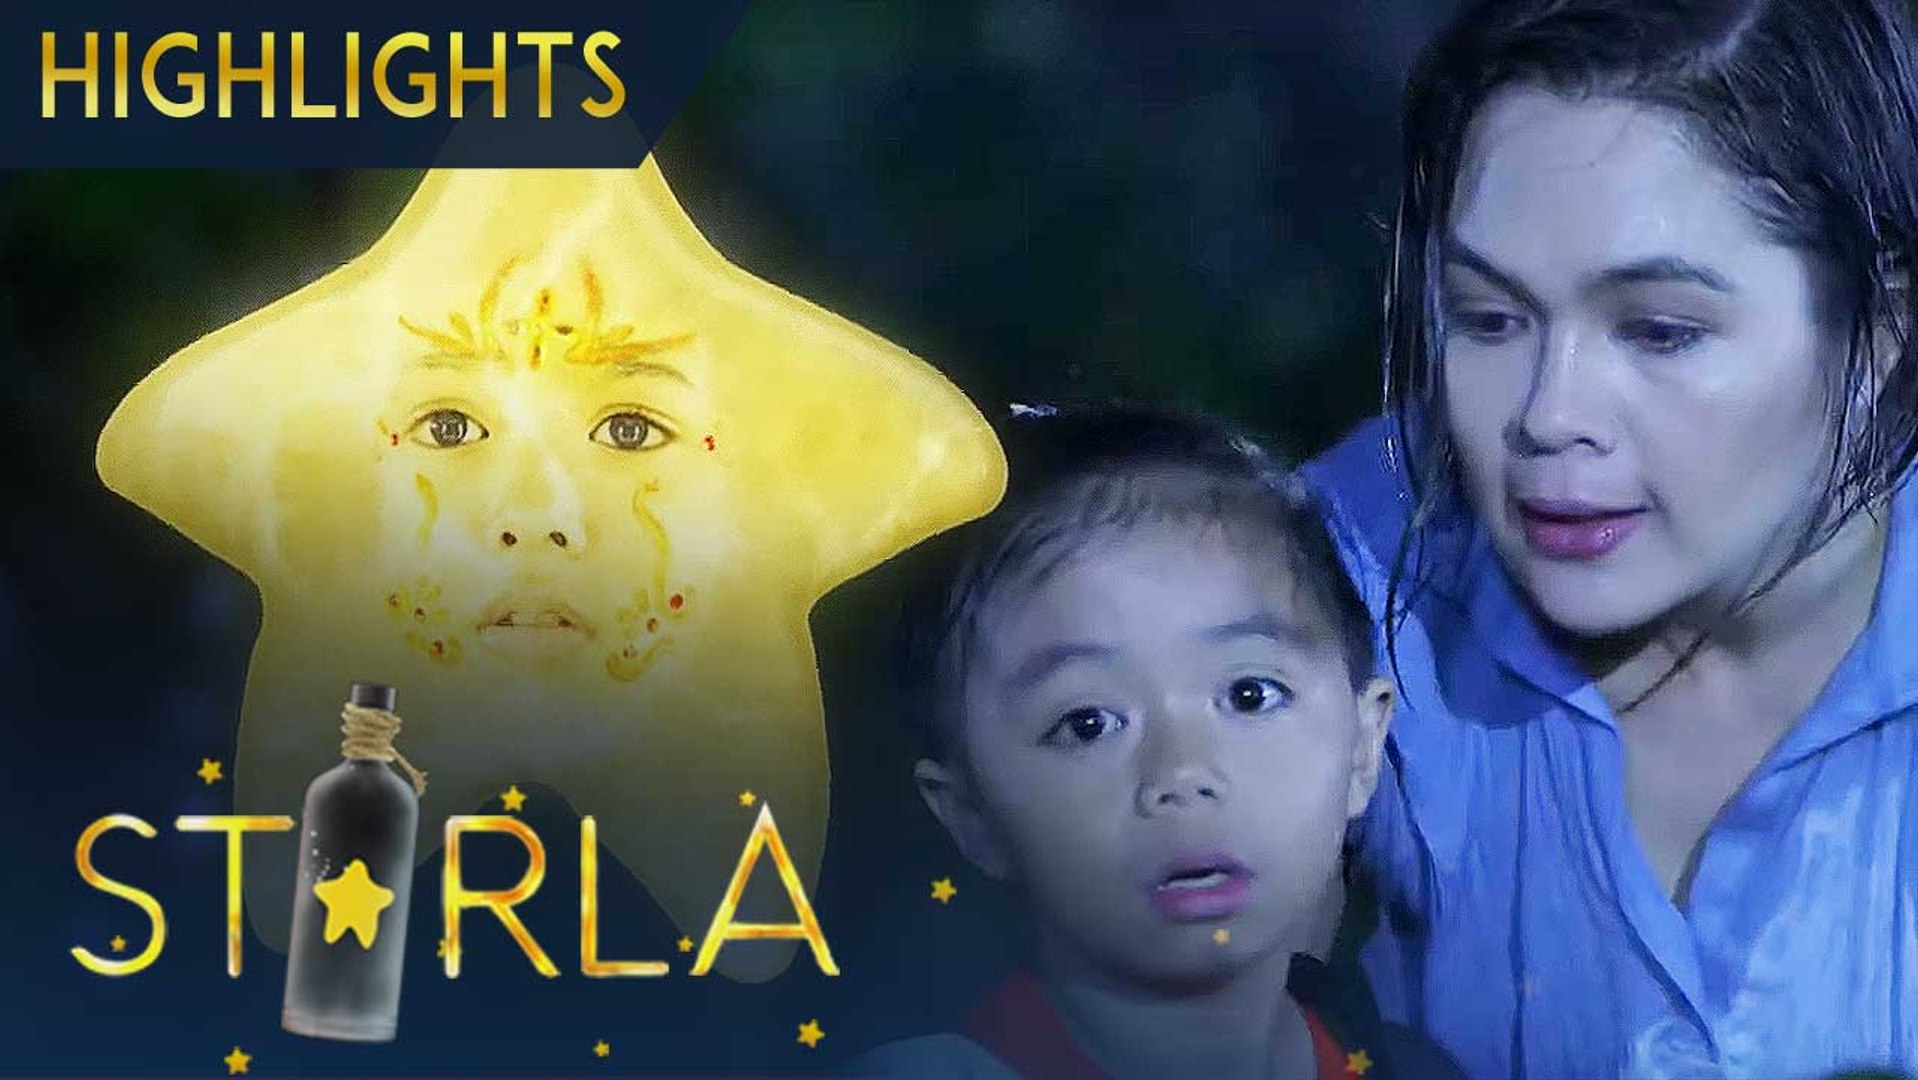 Starla wishes for Buboy and Teresa's safety | Starla